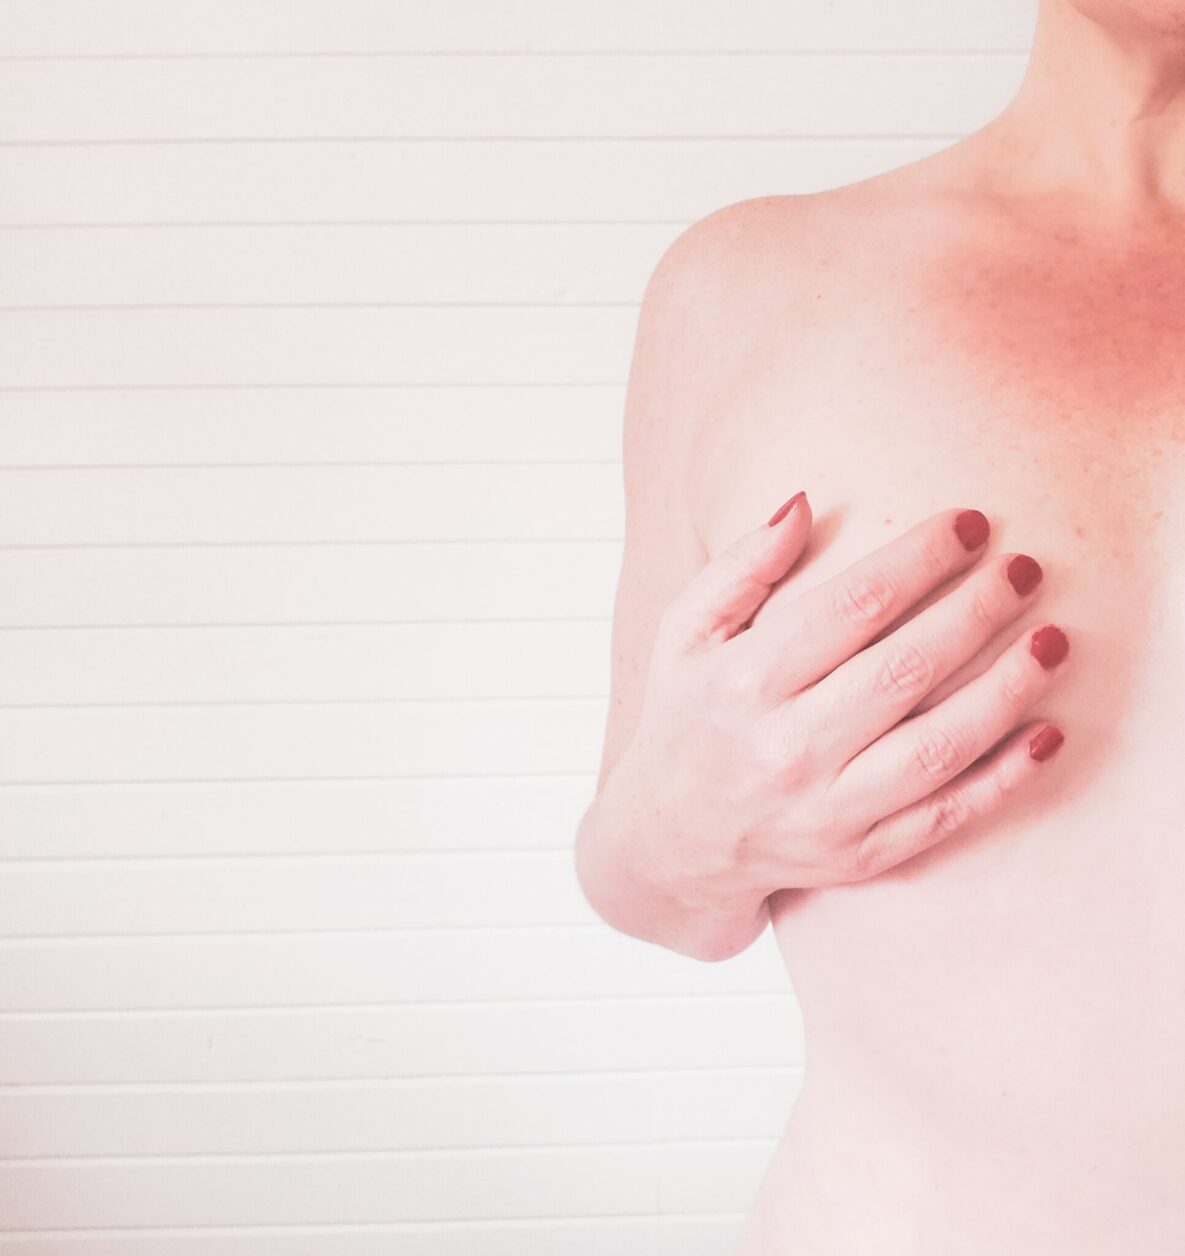 Breast lumps, breast cancer